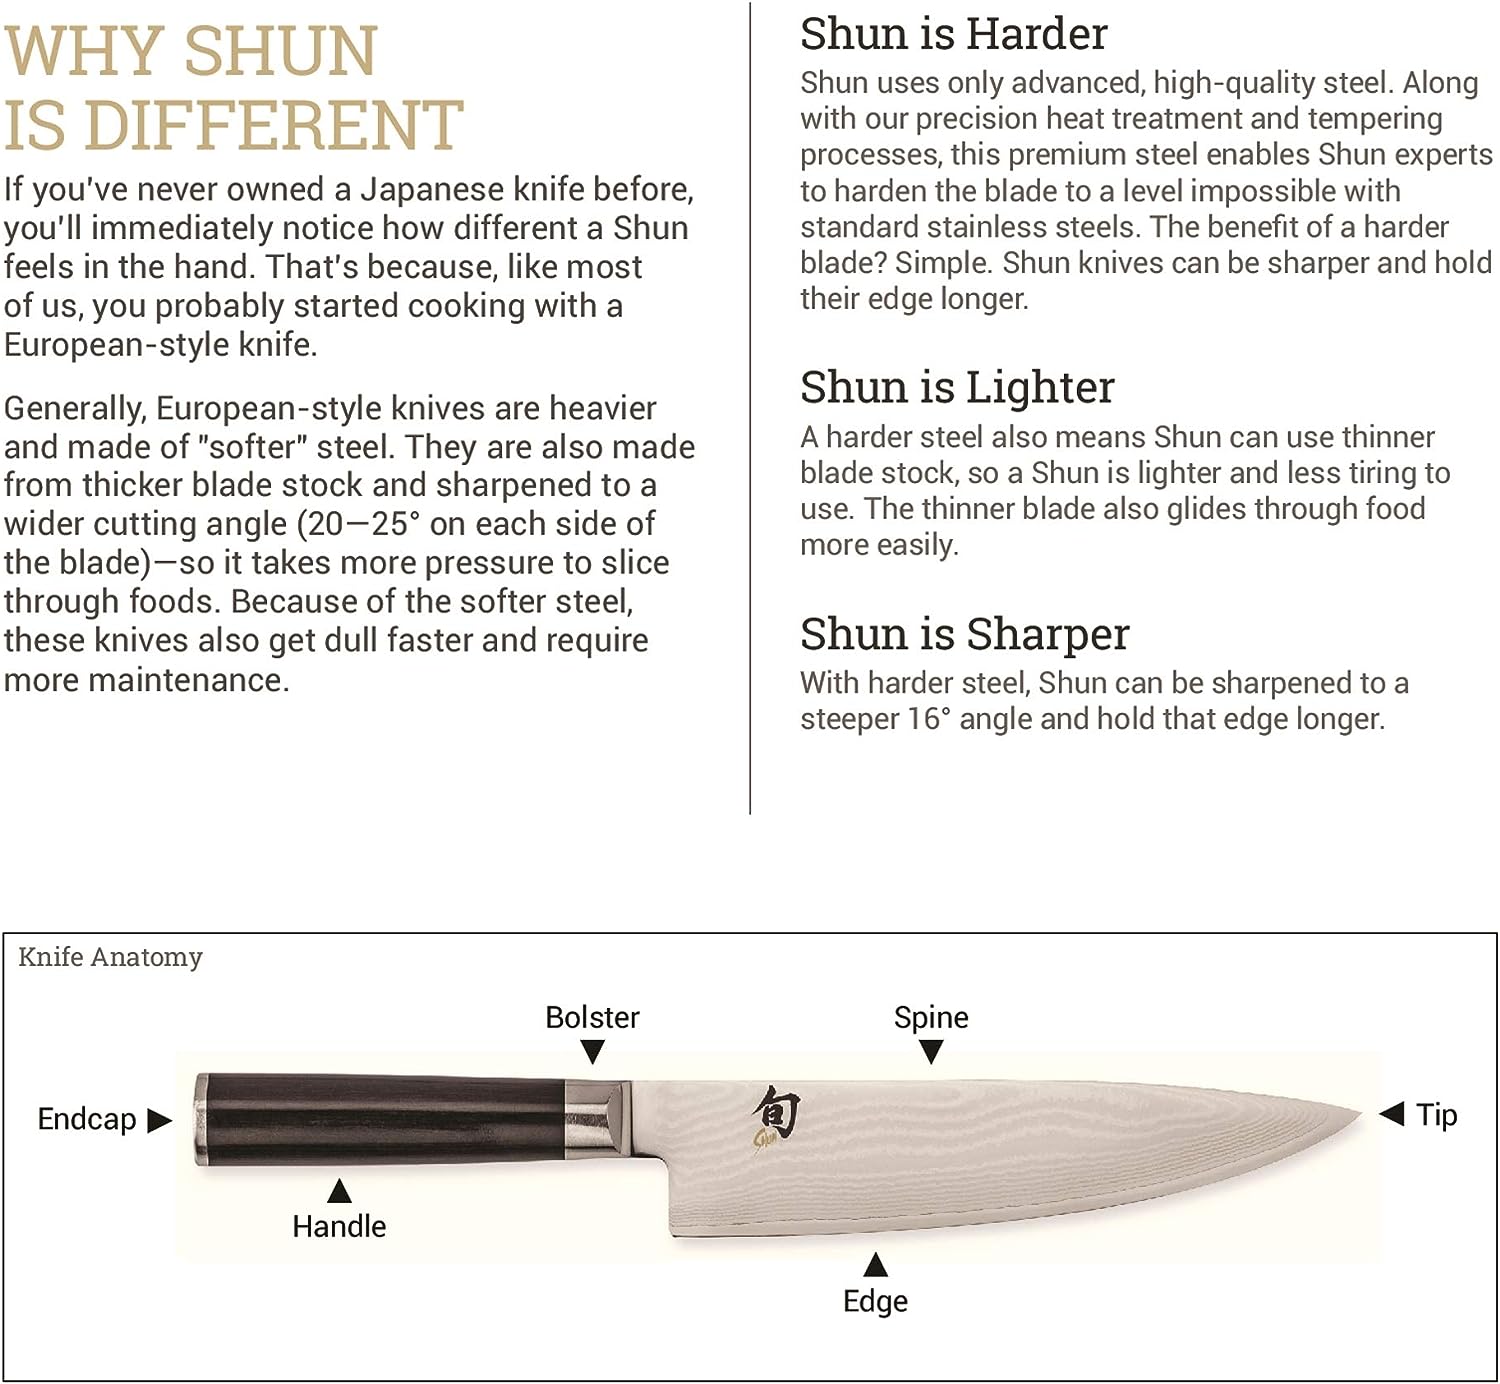 Shun Premier 7 Santoku Knife Hand-Sharpened, Handcrafted in Japan, Light, Agile and Easy to Maneuver, 7-Inch, Silver